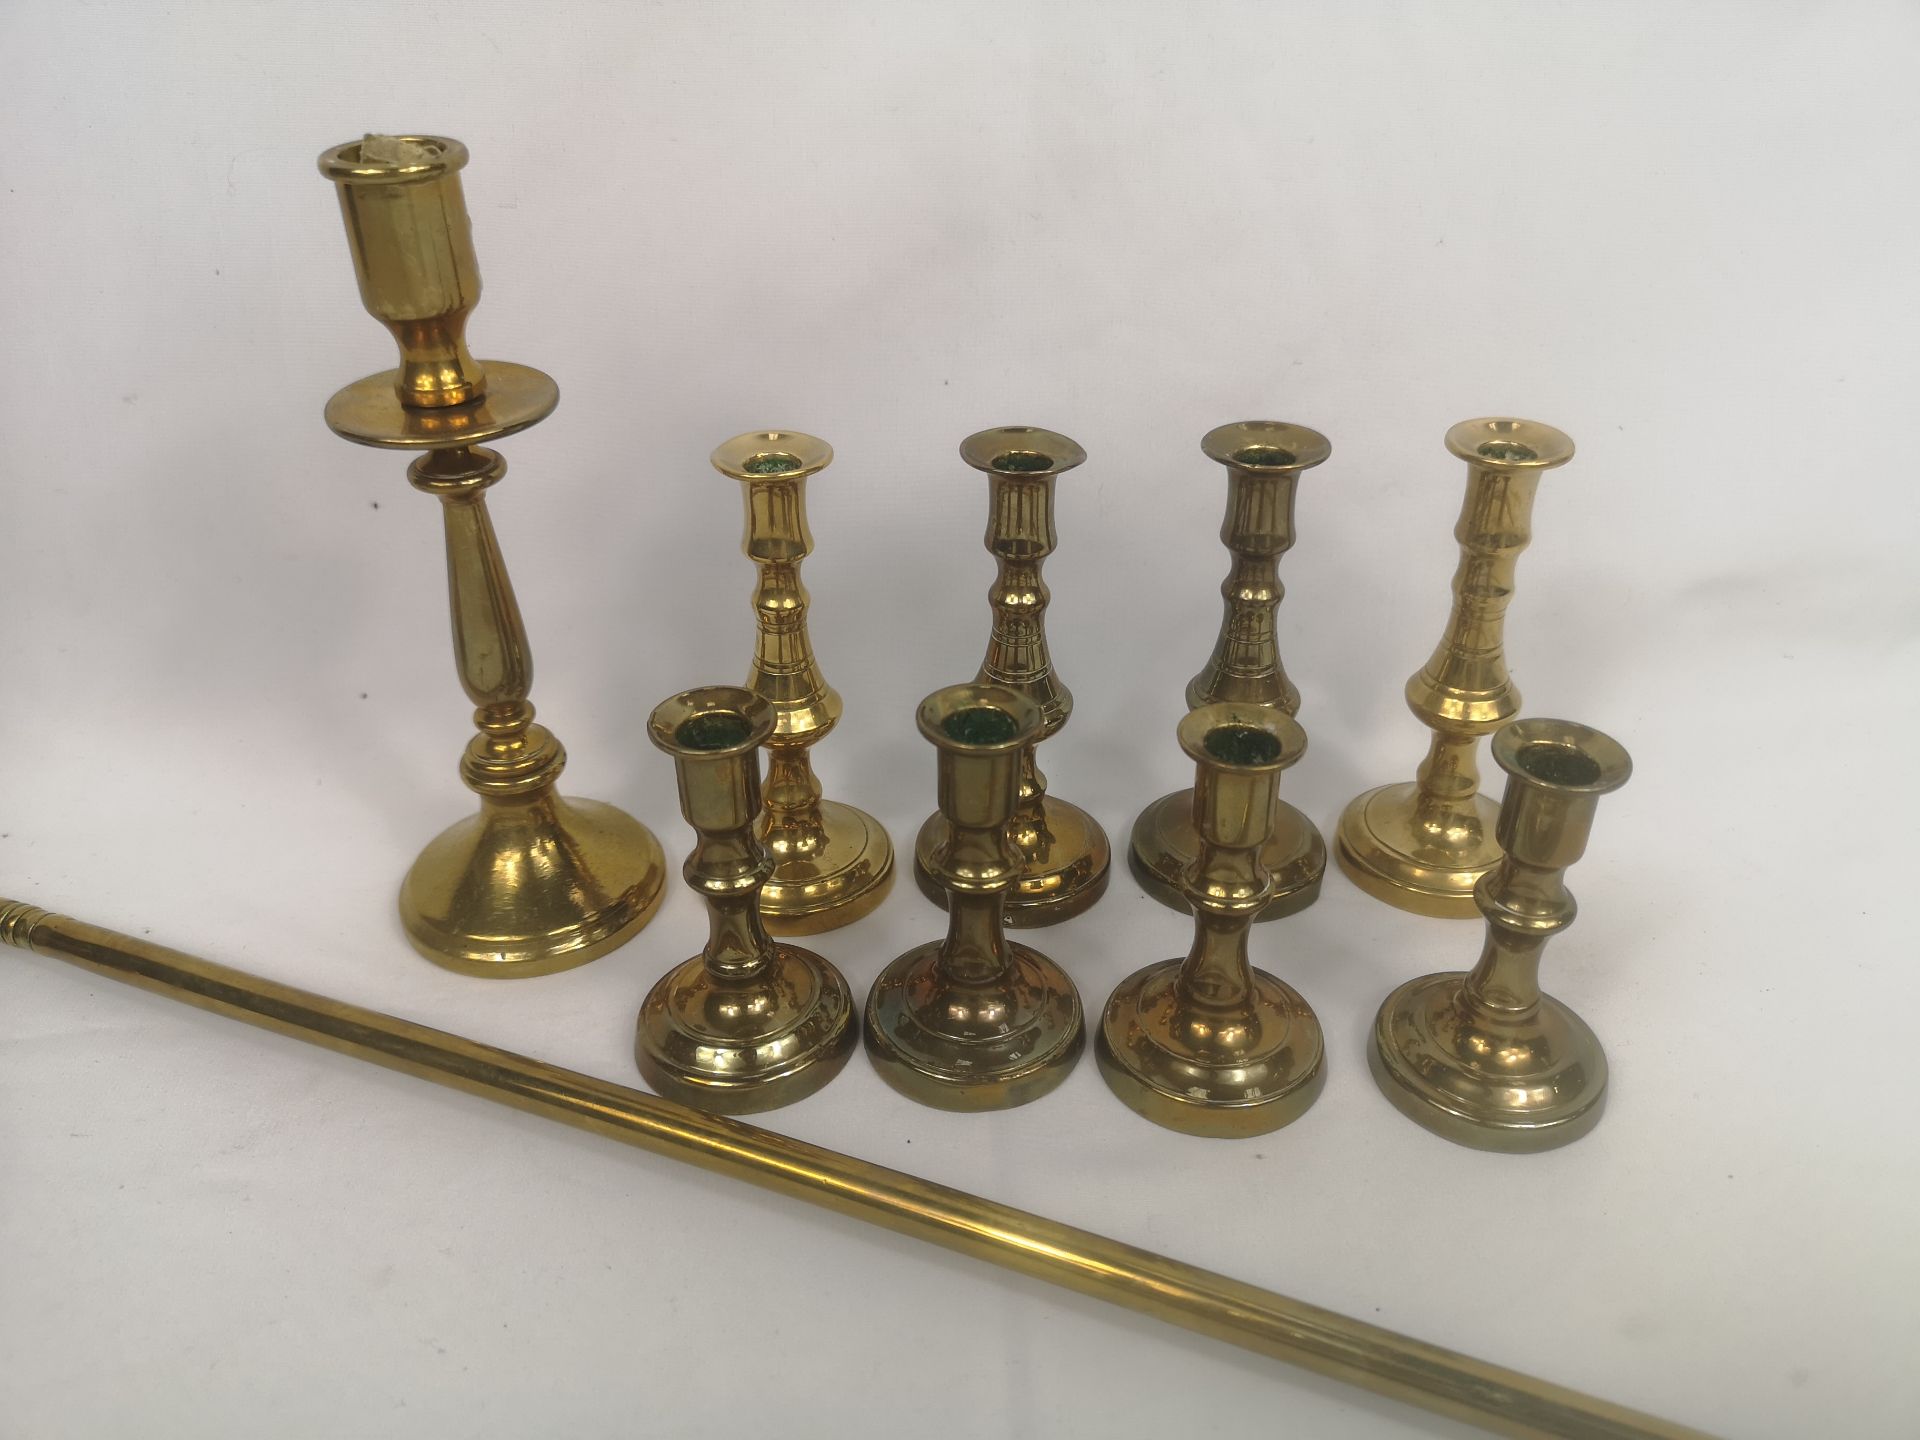 Four pairs of brass candlesticks - Image 5 of 5